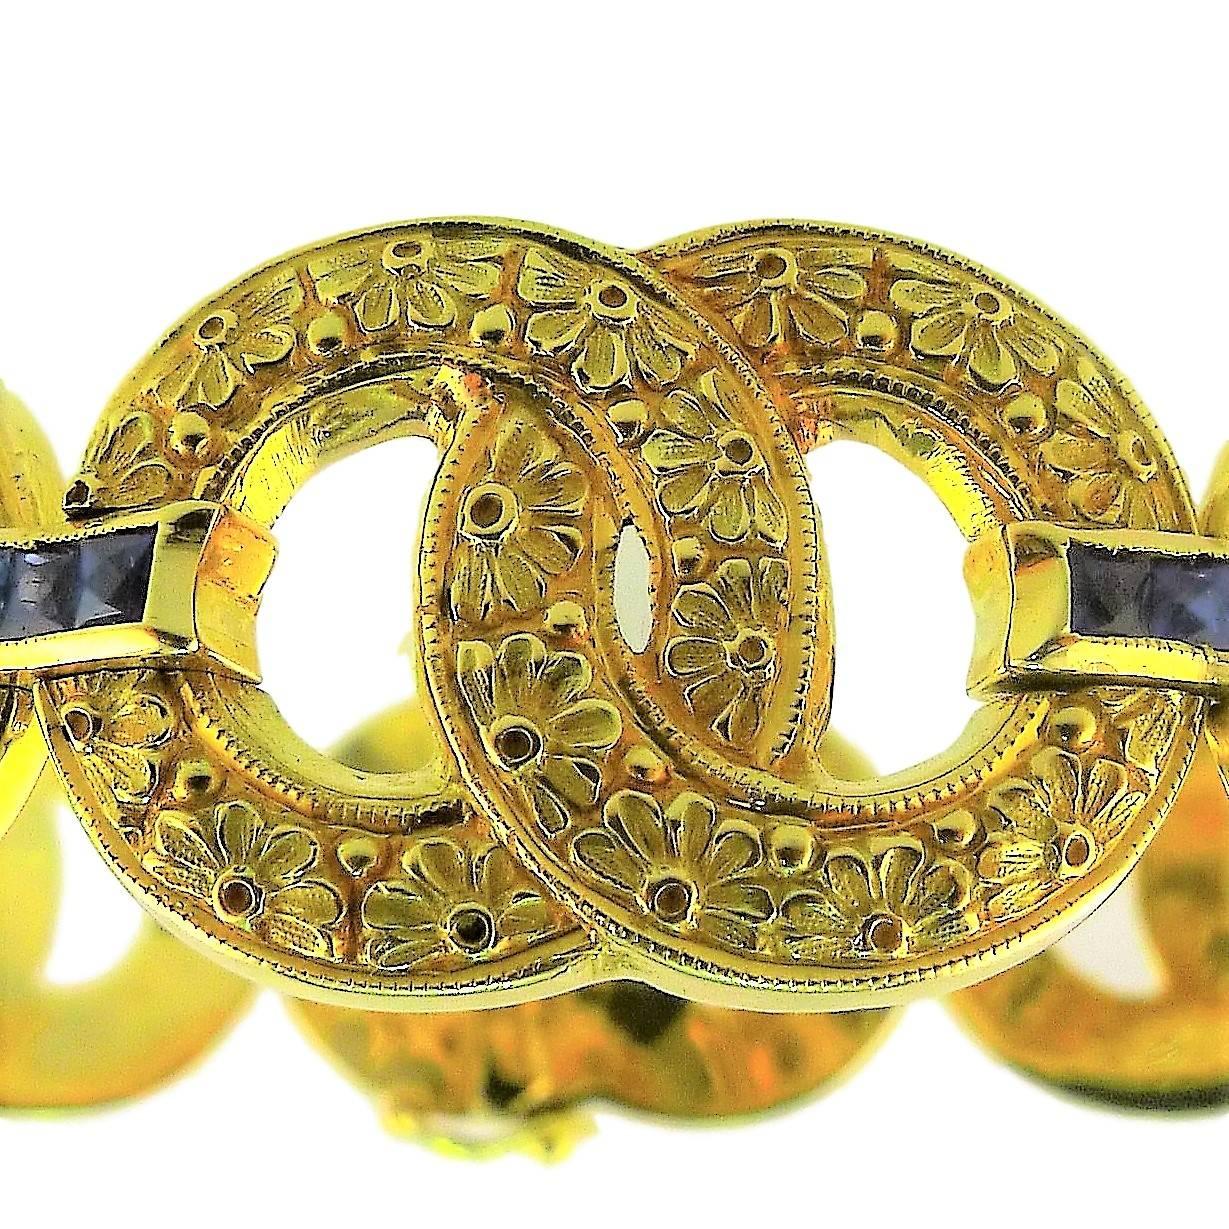 A French 1920's Vintage reminder of the fine jewellery that inspired Coco Chanel with textured and polished surfaces for her famous Chanel buttons.
'La Mode se démode, le style jamais.'  Coco Chanel.
France. Yellow gold sapphire bracelet with